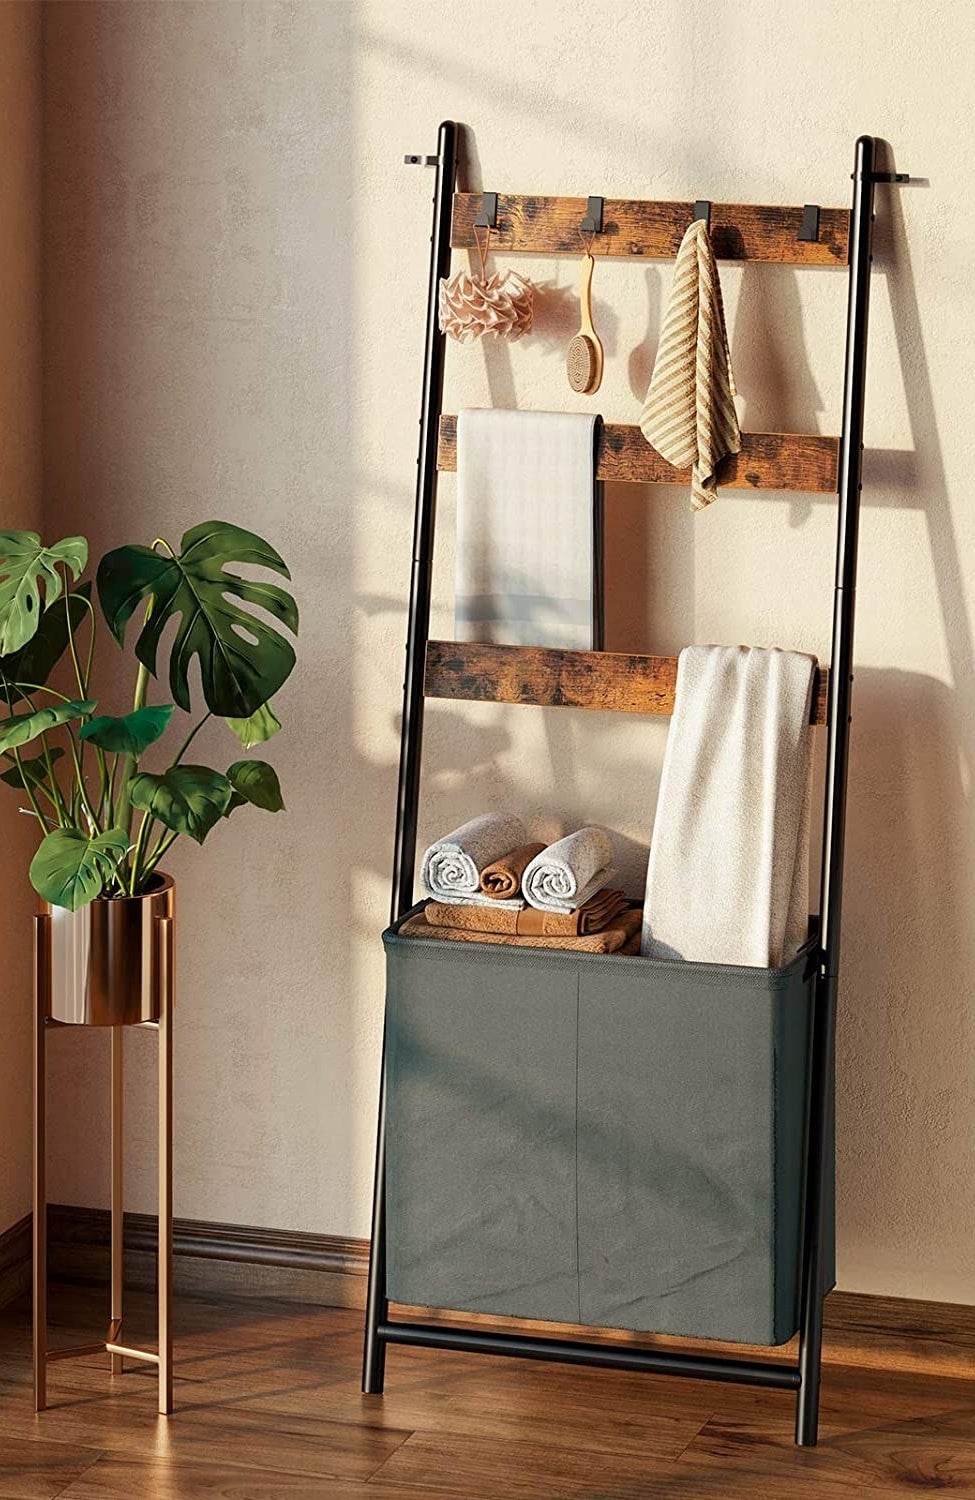 The ladder shelf leaning against a wall, next to a plant